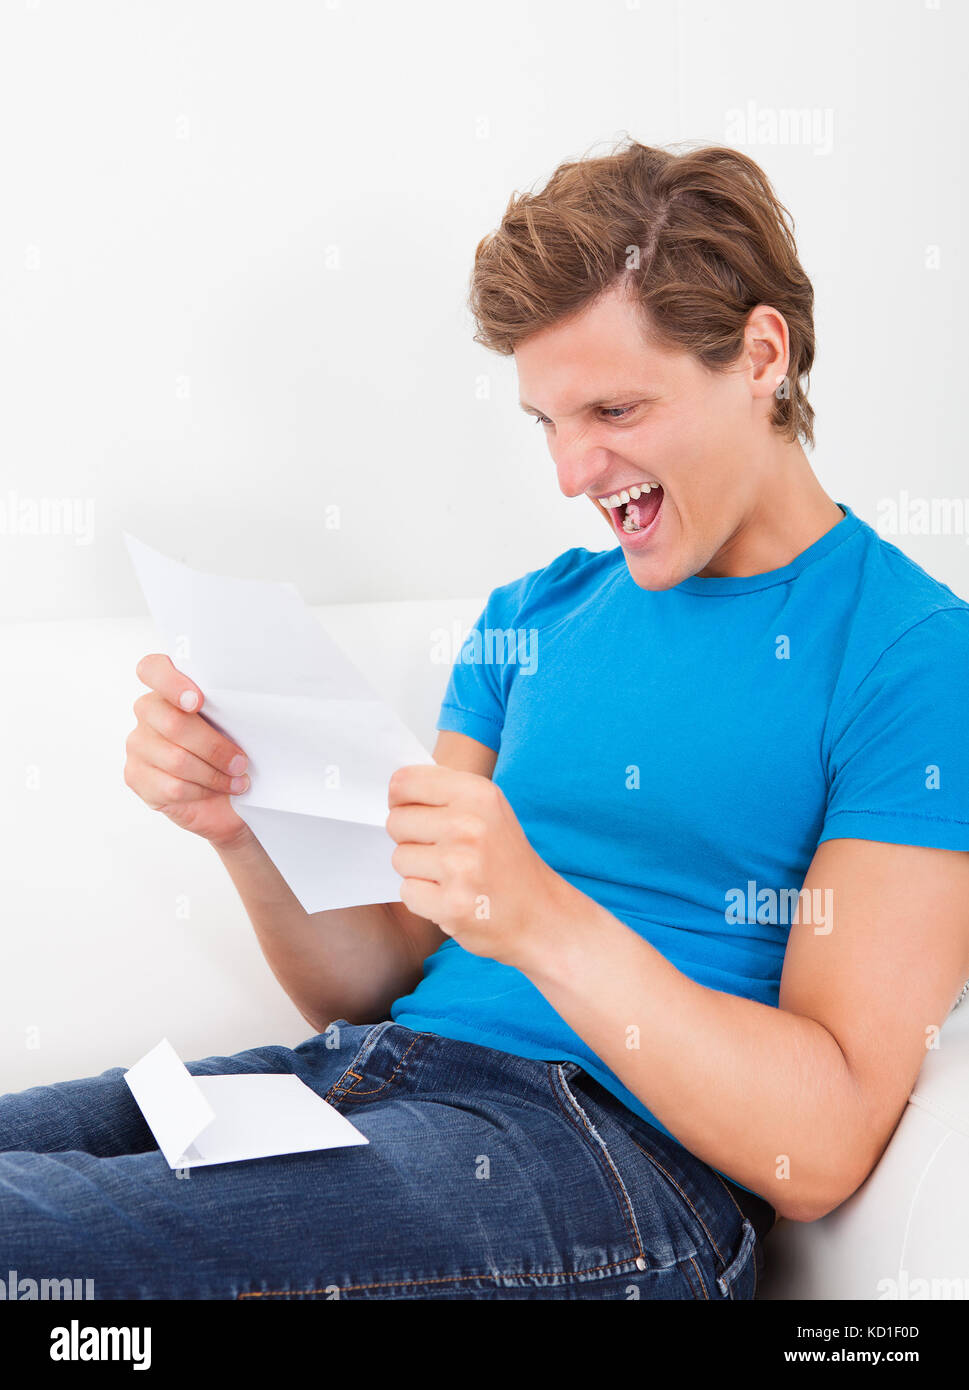 Excited Young Man Clenching His Fist Looking At Paper Stock Photo